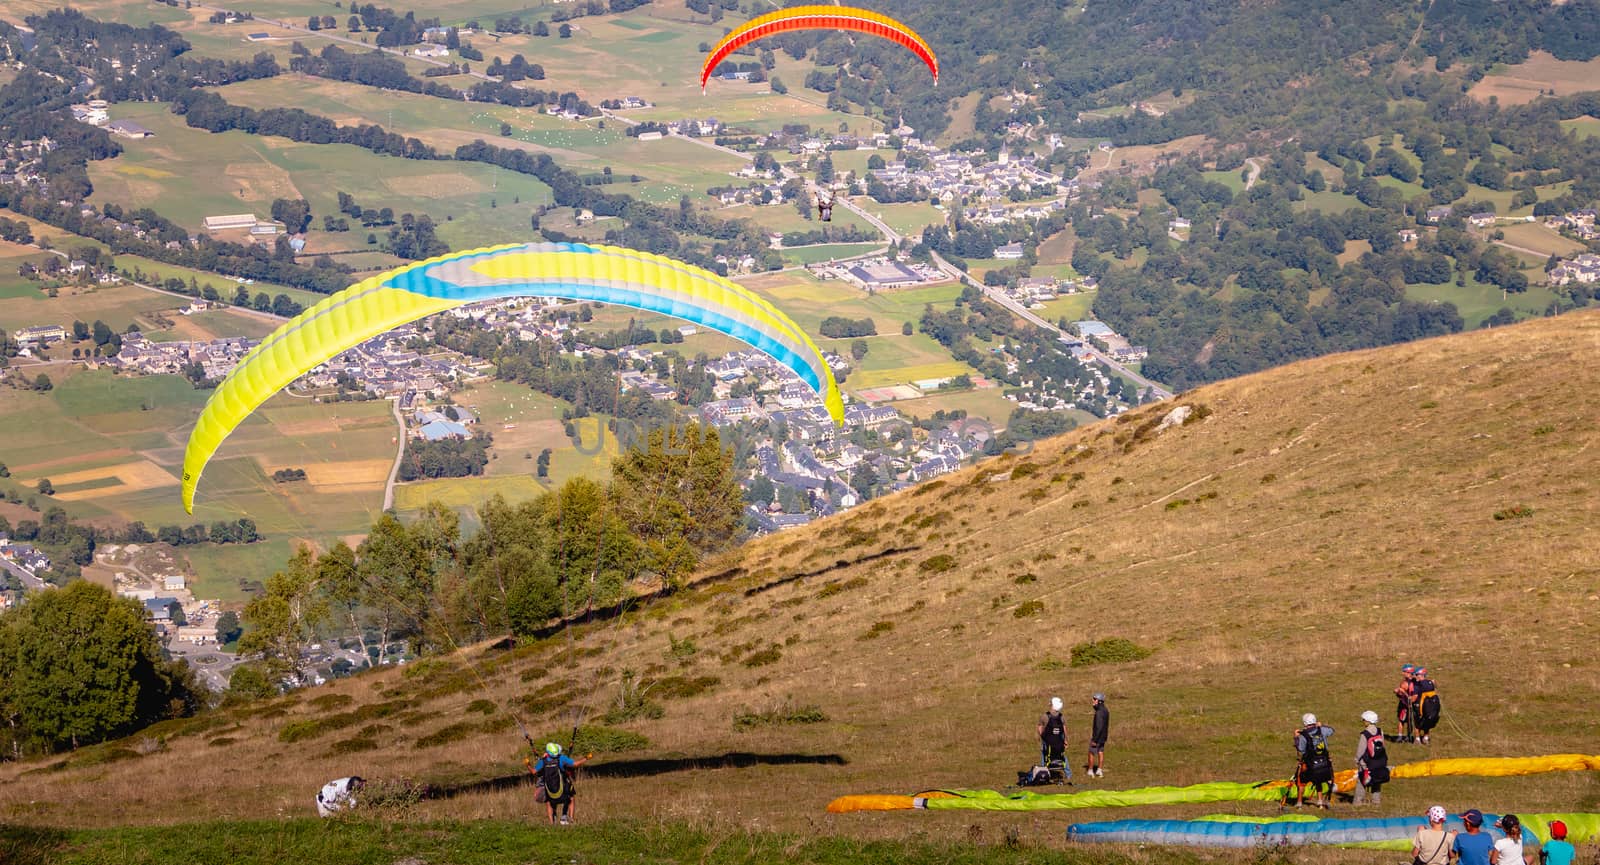 Saint Lary Soulan, France - August 20, 2018: takeoff of a paraglider from the top of the mountain, at 1700 meters altitude to fly over the valley on a summer day